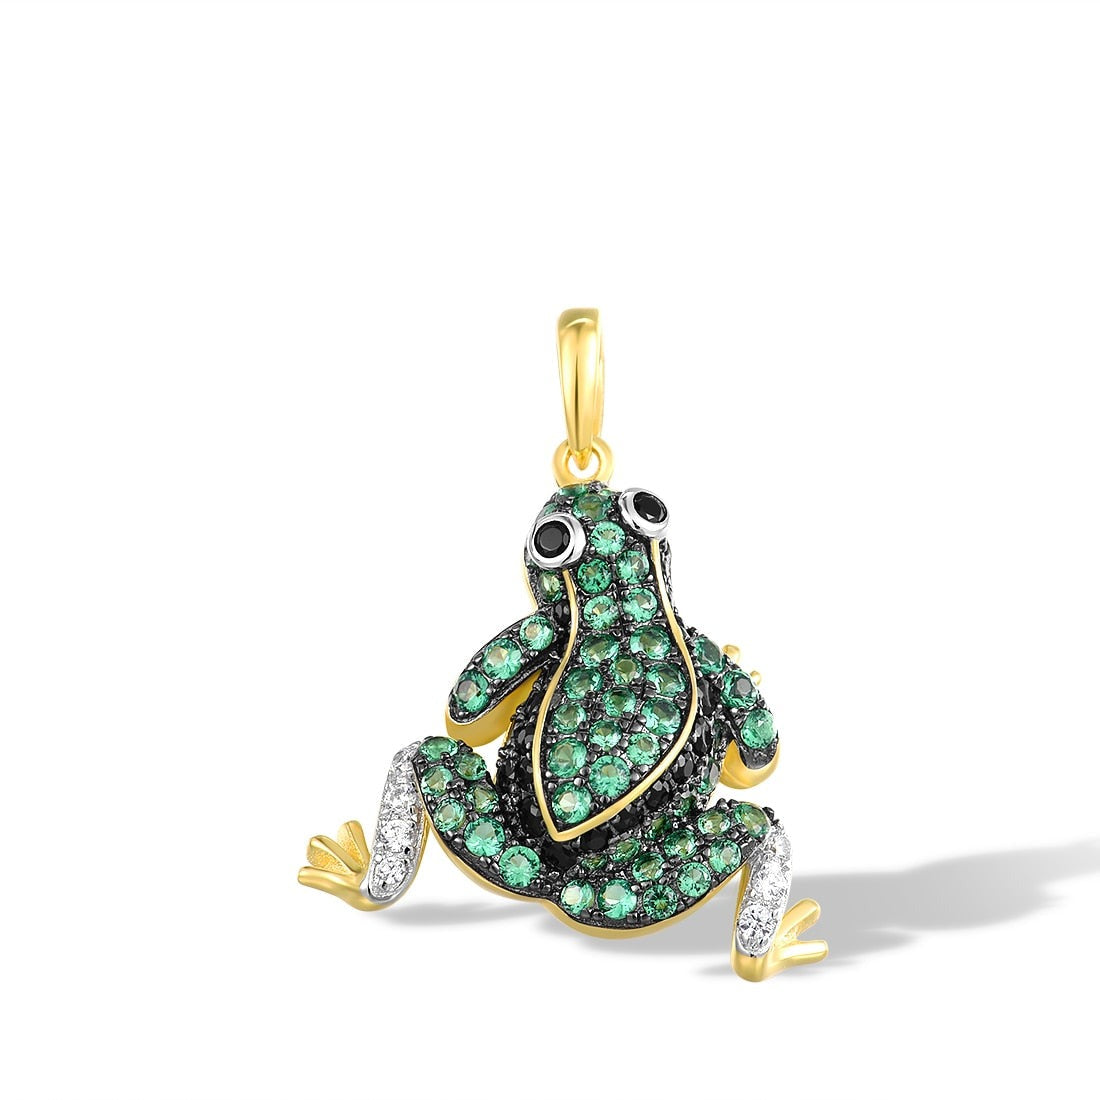 "Crystal Green Frog" jewelry by Style's Bug - Style's Bug 6 / Only Pendant